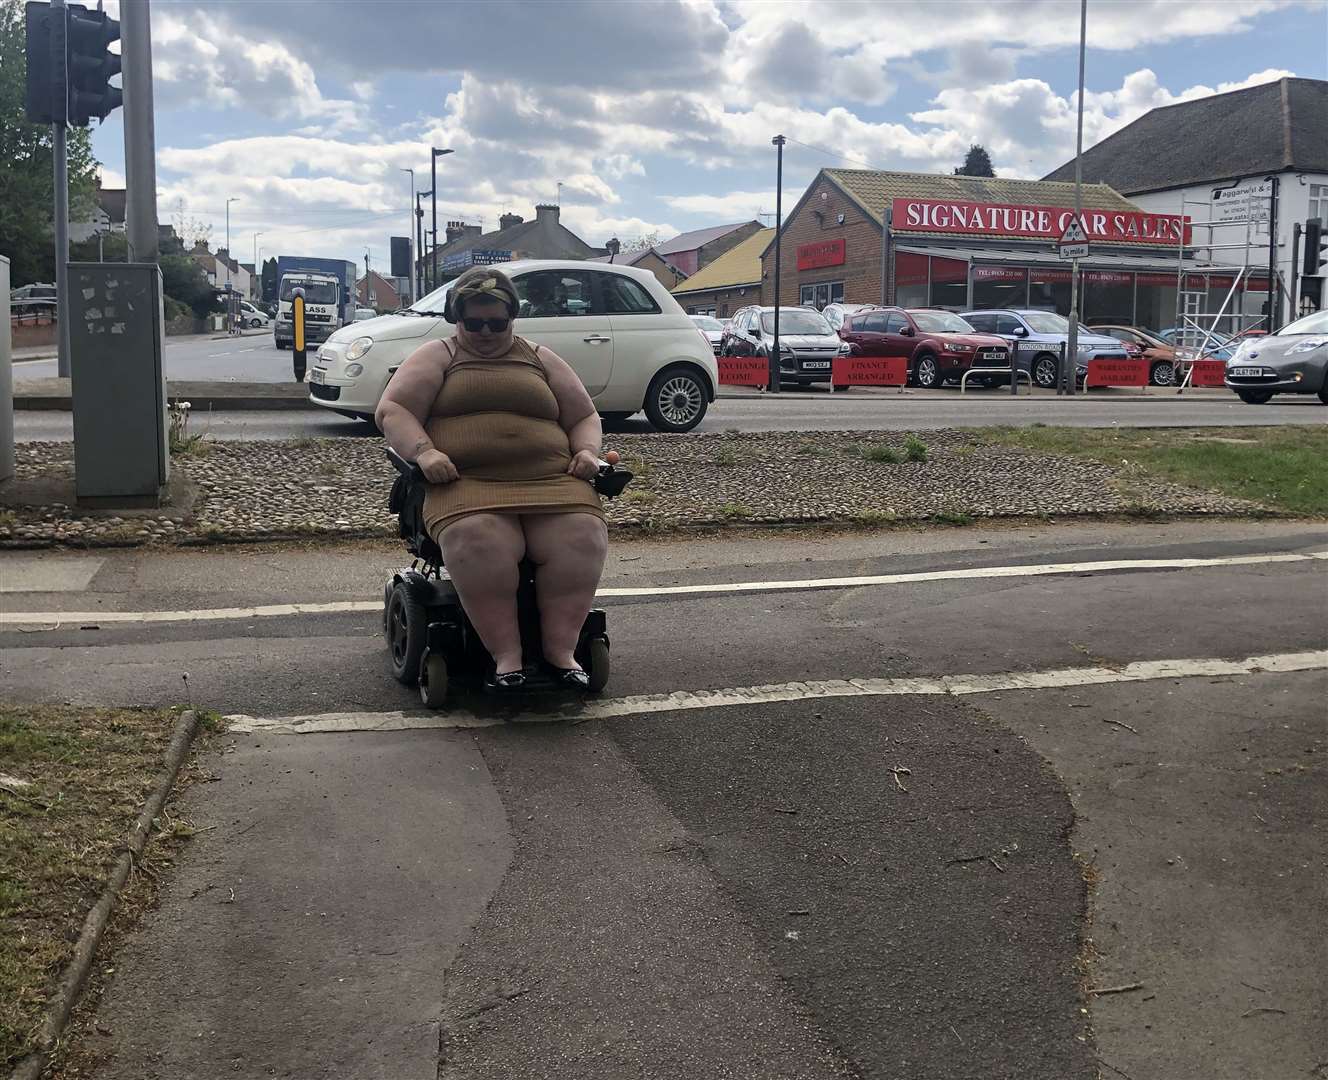 Sally cannot go down the path safely in her wheelchair